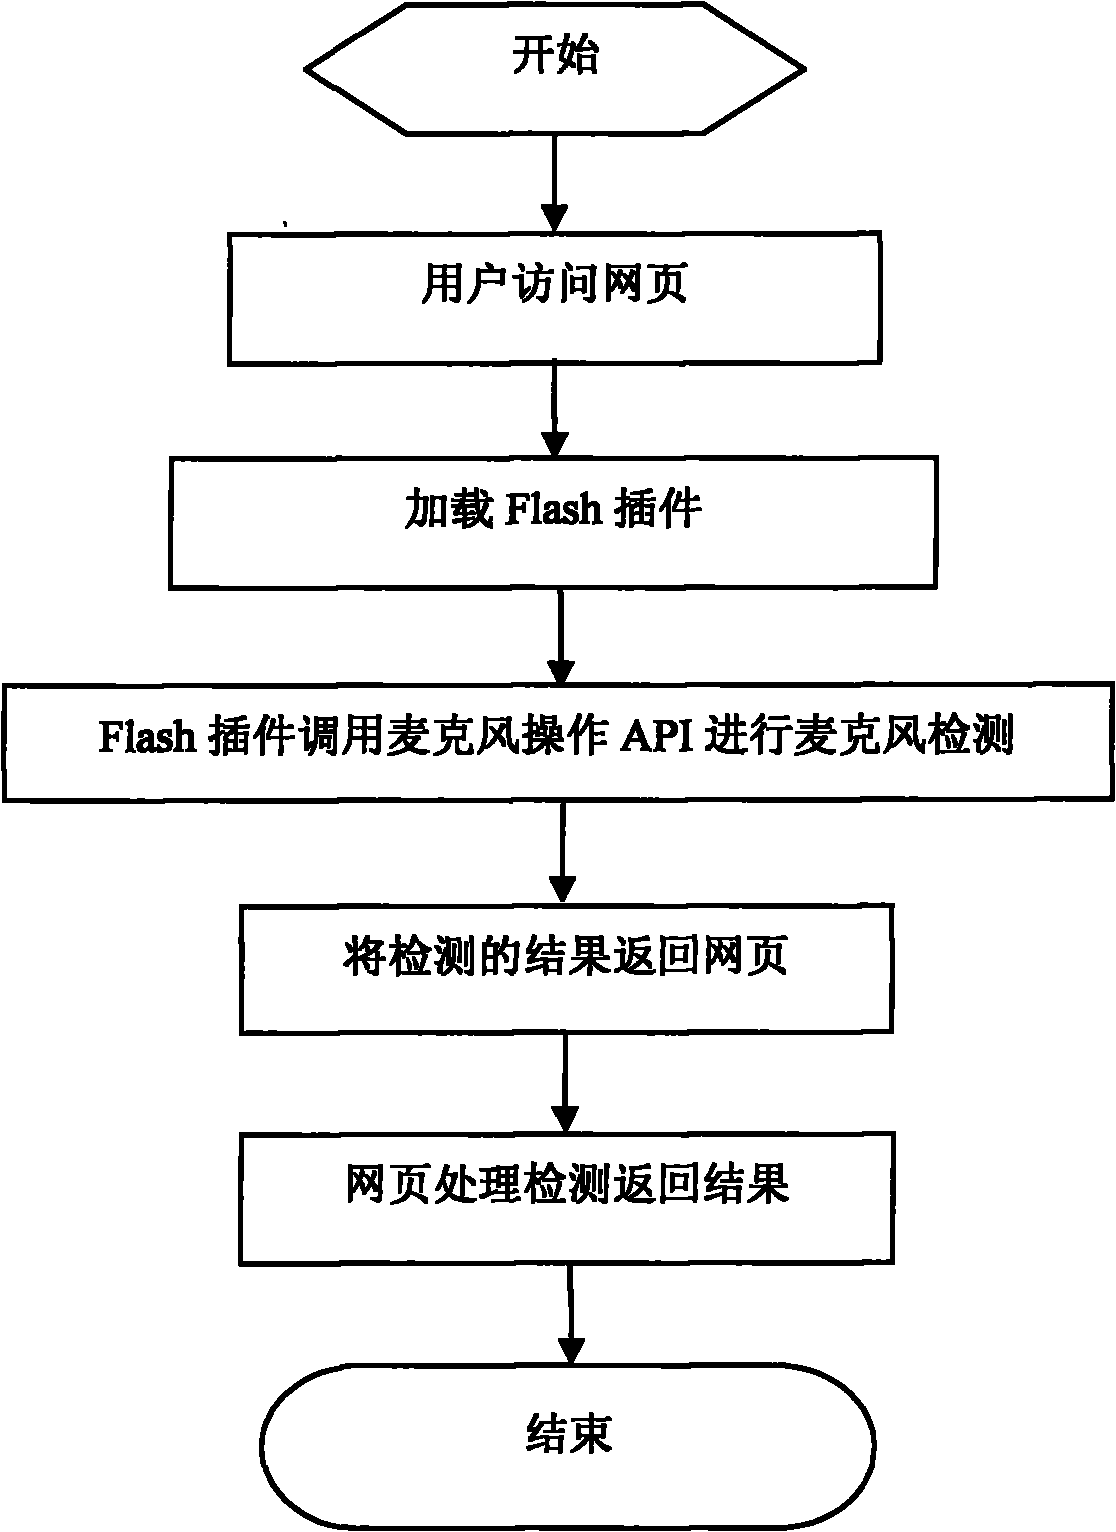 Method for implementing microphone detection on web page